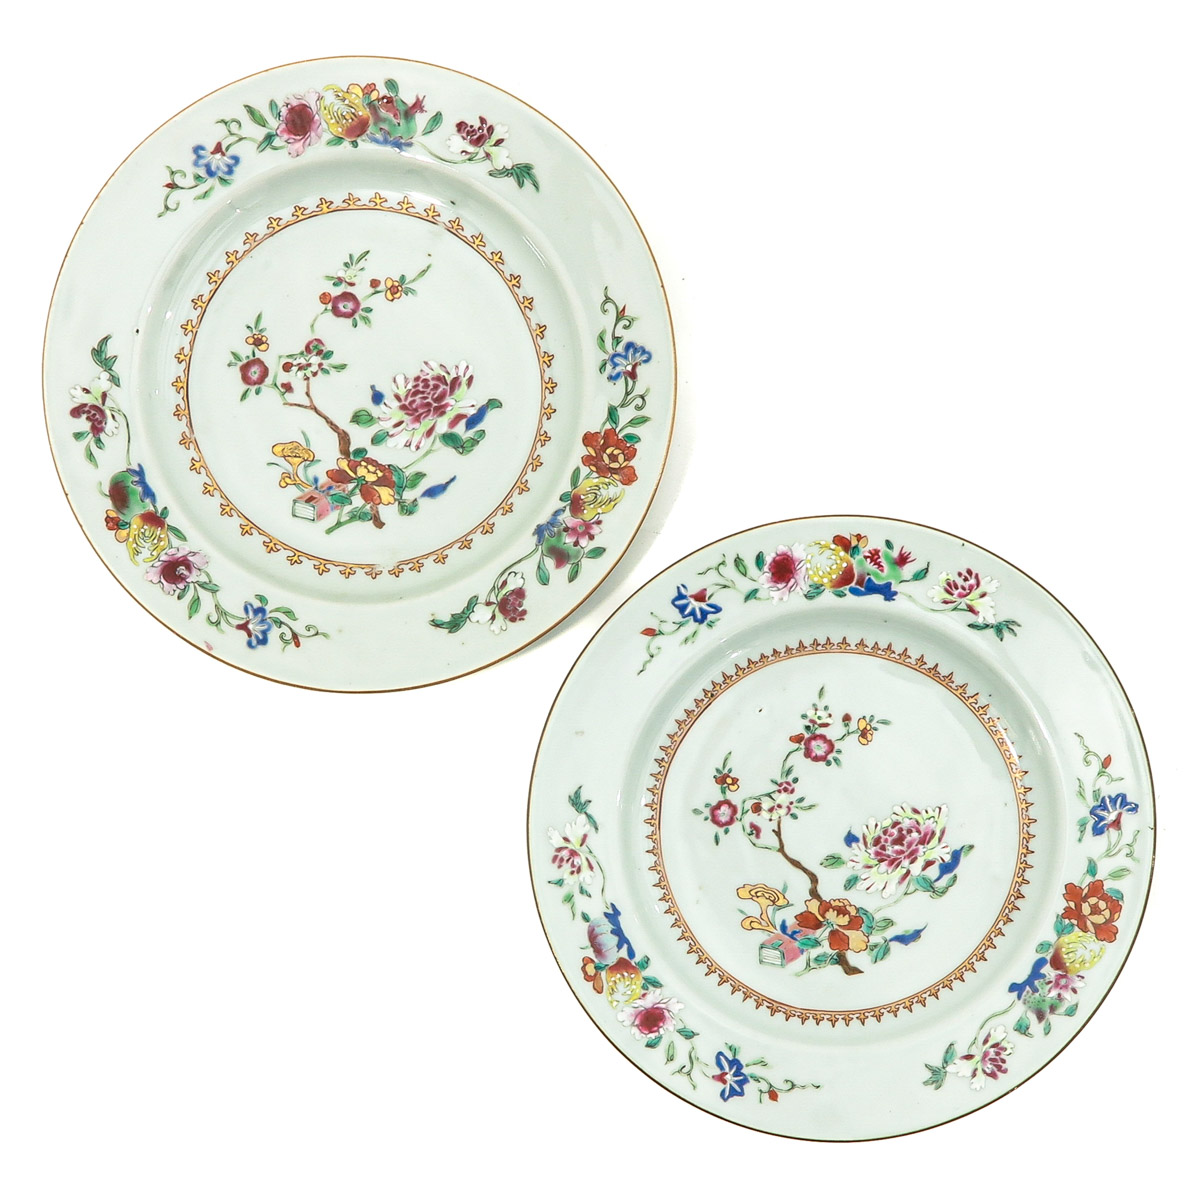 A Series of 6 Famille Rose Plates - Image 3 of 10